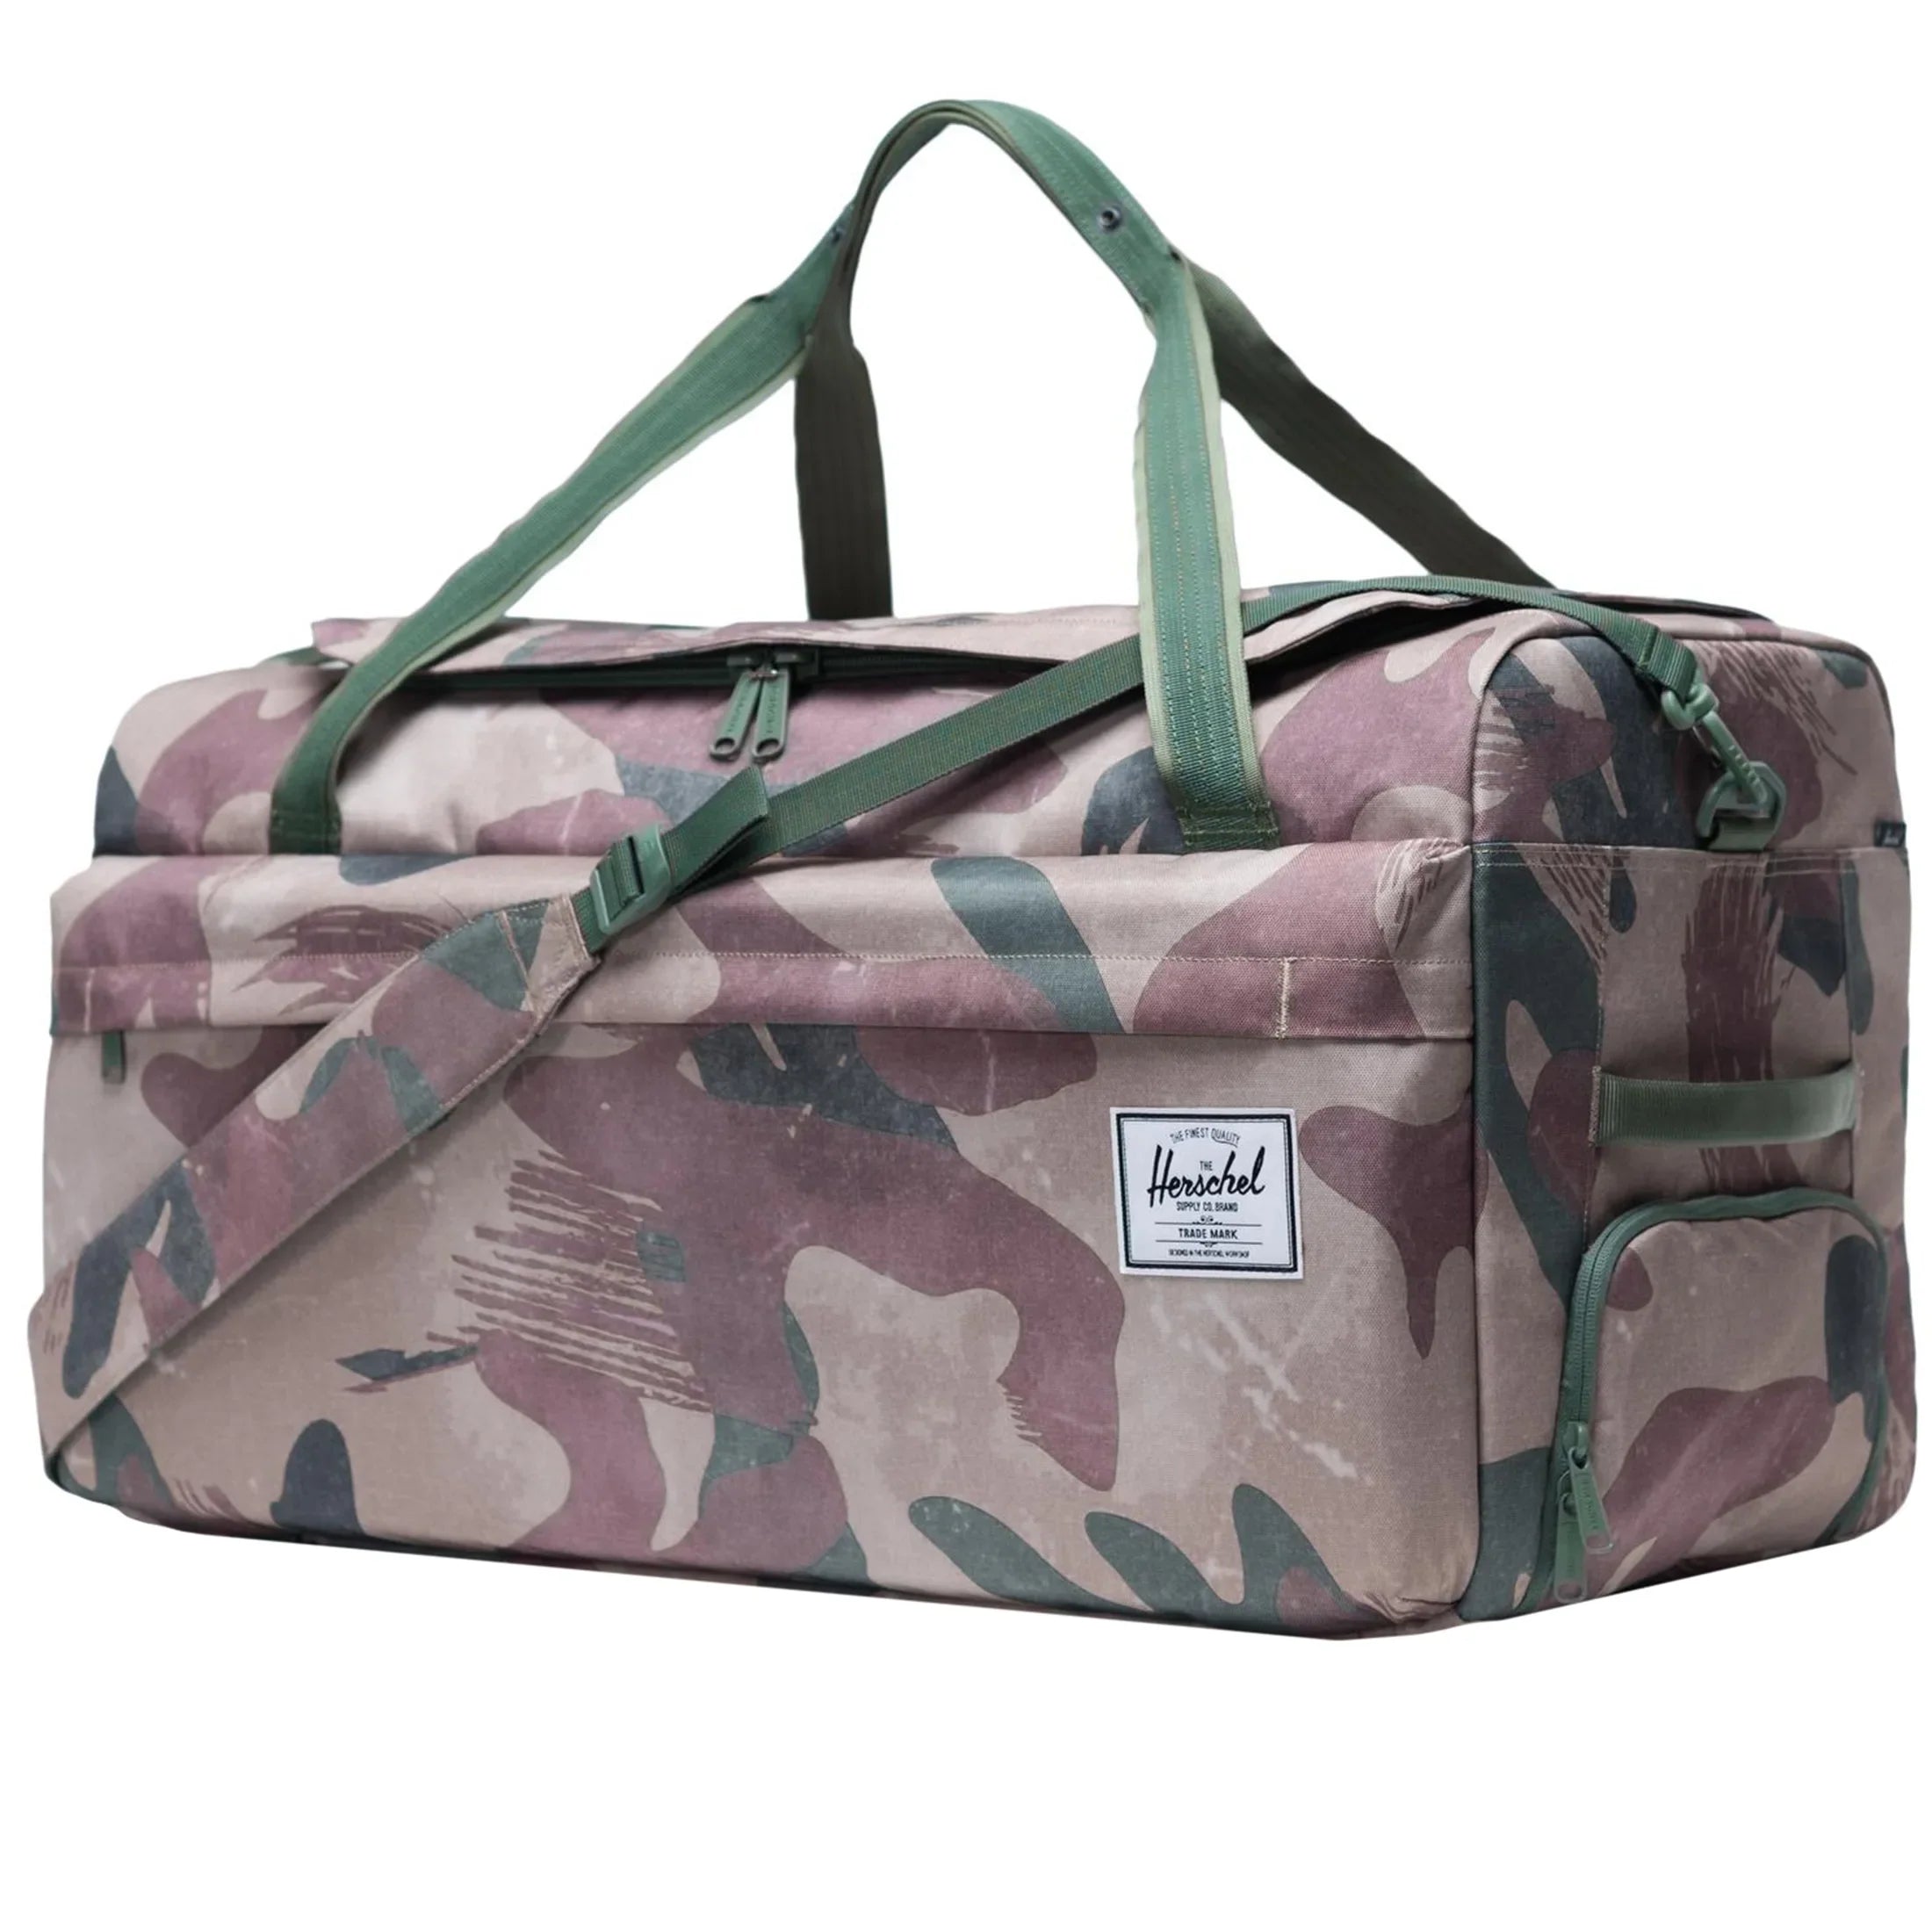 Herschel Travel Collection Outfitter Travel Bag 66 cm - brushstroke camo